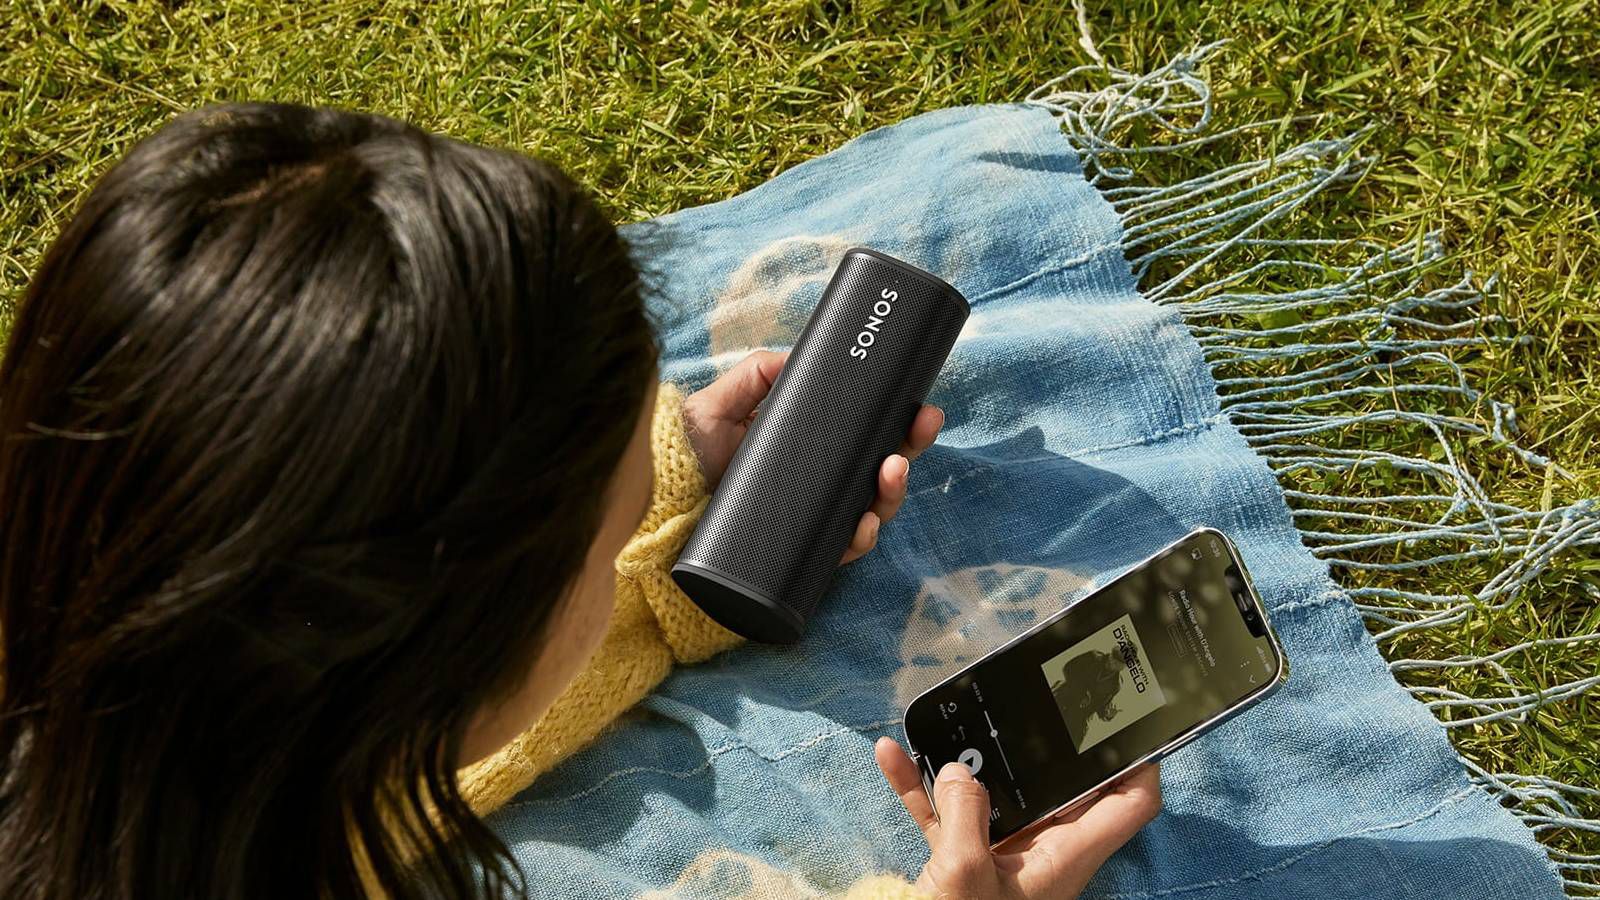 Sonos unveils $ 169 portable speaker with AirPlay 2, audio swap, and more